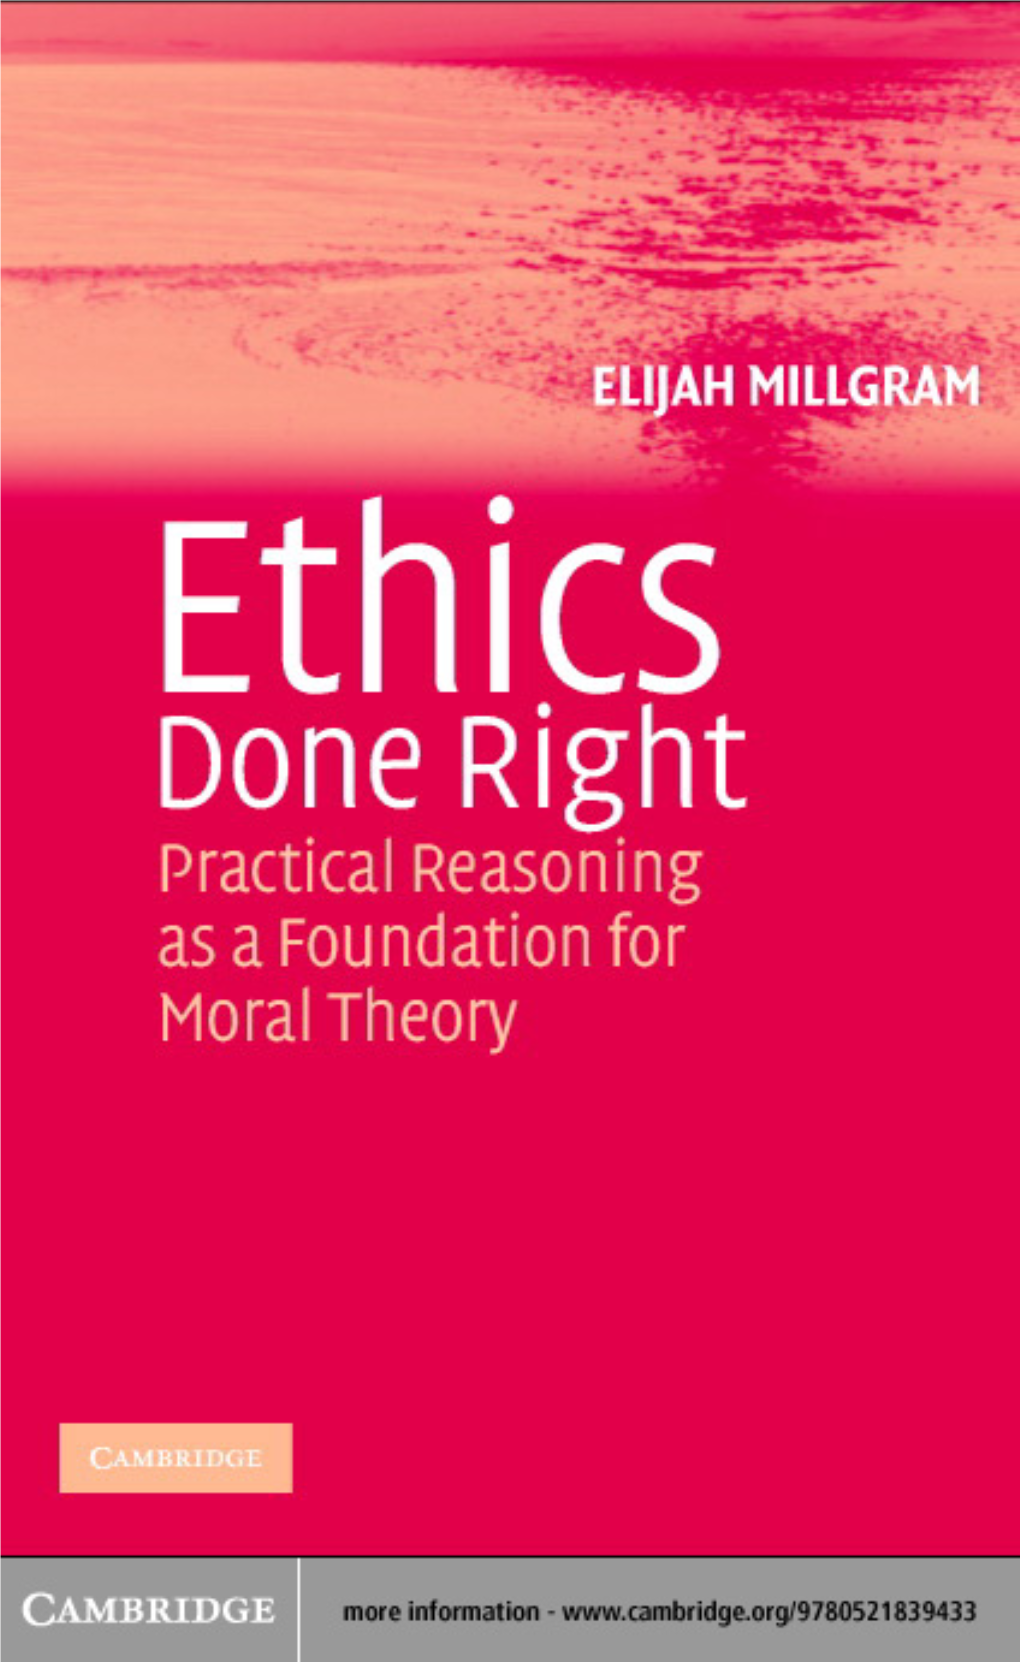 Practical Reasoning As a Foundation for Moral Theory